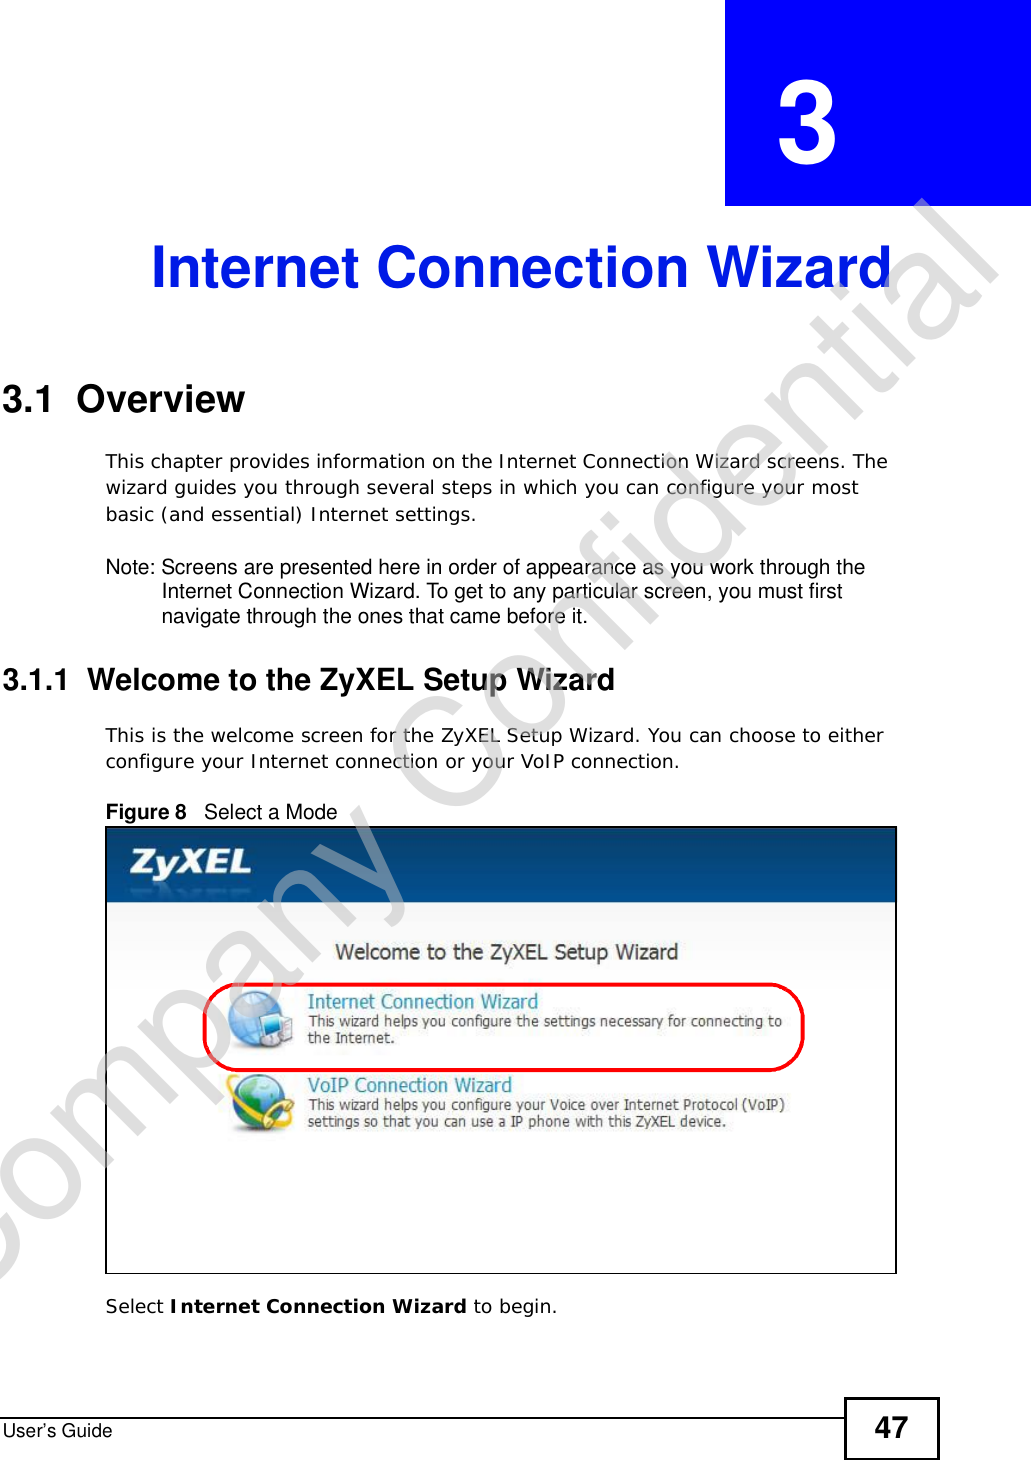 User’s Guide 47CHAPTER  3 Internet Connection Wizard3.1  OverviewThis chapter provides information on the Internet Connection Wizard screens. The wizard guides you through several steps in which you can configure your most basic (and essential) Internet settings.Note: Screens are presented here in order of appearance as you work through the Internet Connection Wizard. To get to any particular screen, you must first navigate through the ones that came before it.3.1.1  Welcome to the ZyXEL Setup WizardThis is the welcome screen for the ZyXEL Setup Wizard. You can choose to either configure your Internet connection or your VoIP connection.Figure 8   Select a ModeSelect Internet Connection Wizard to begin.Company Confidential